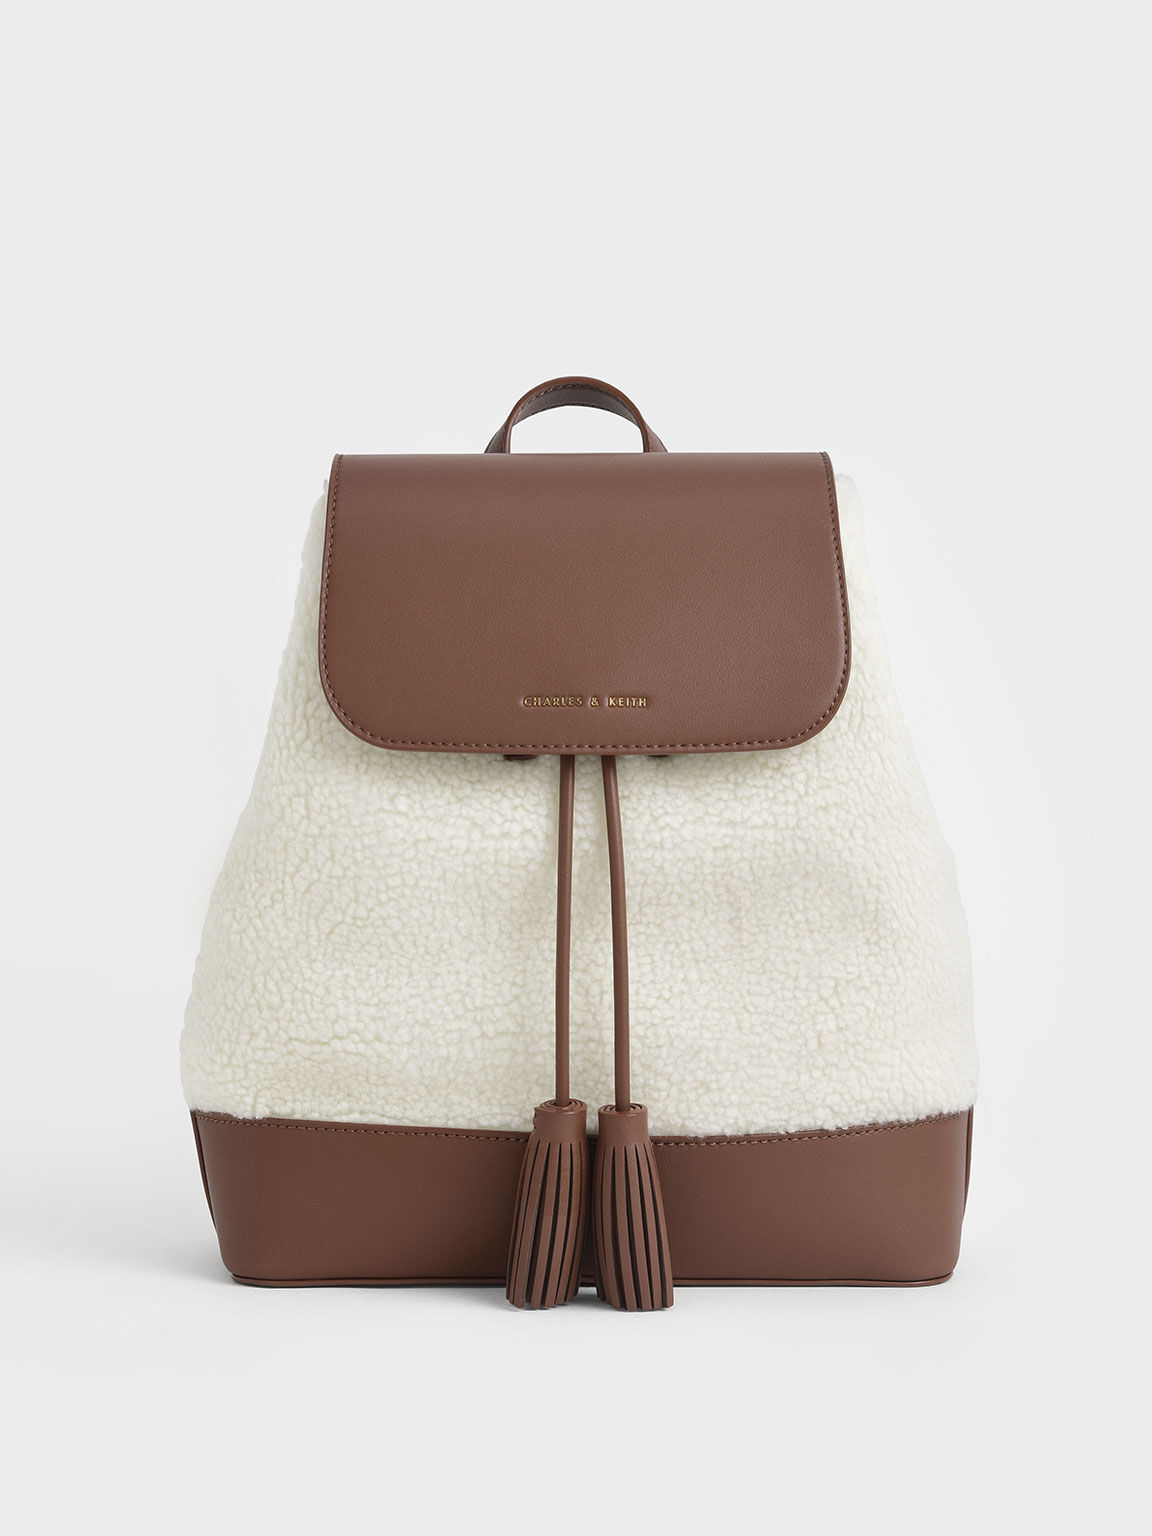 Genevieve Two-Tone Textured Tassel Backpack, Cream, hi-res